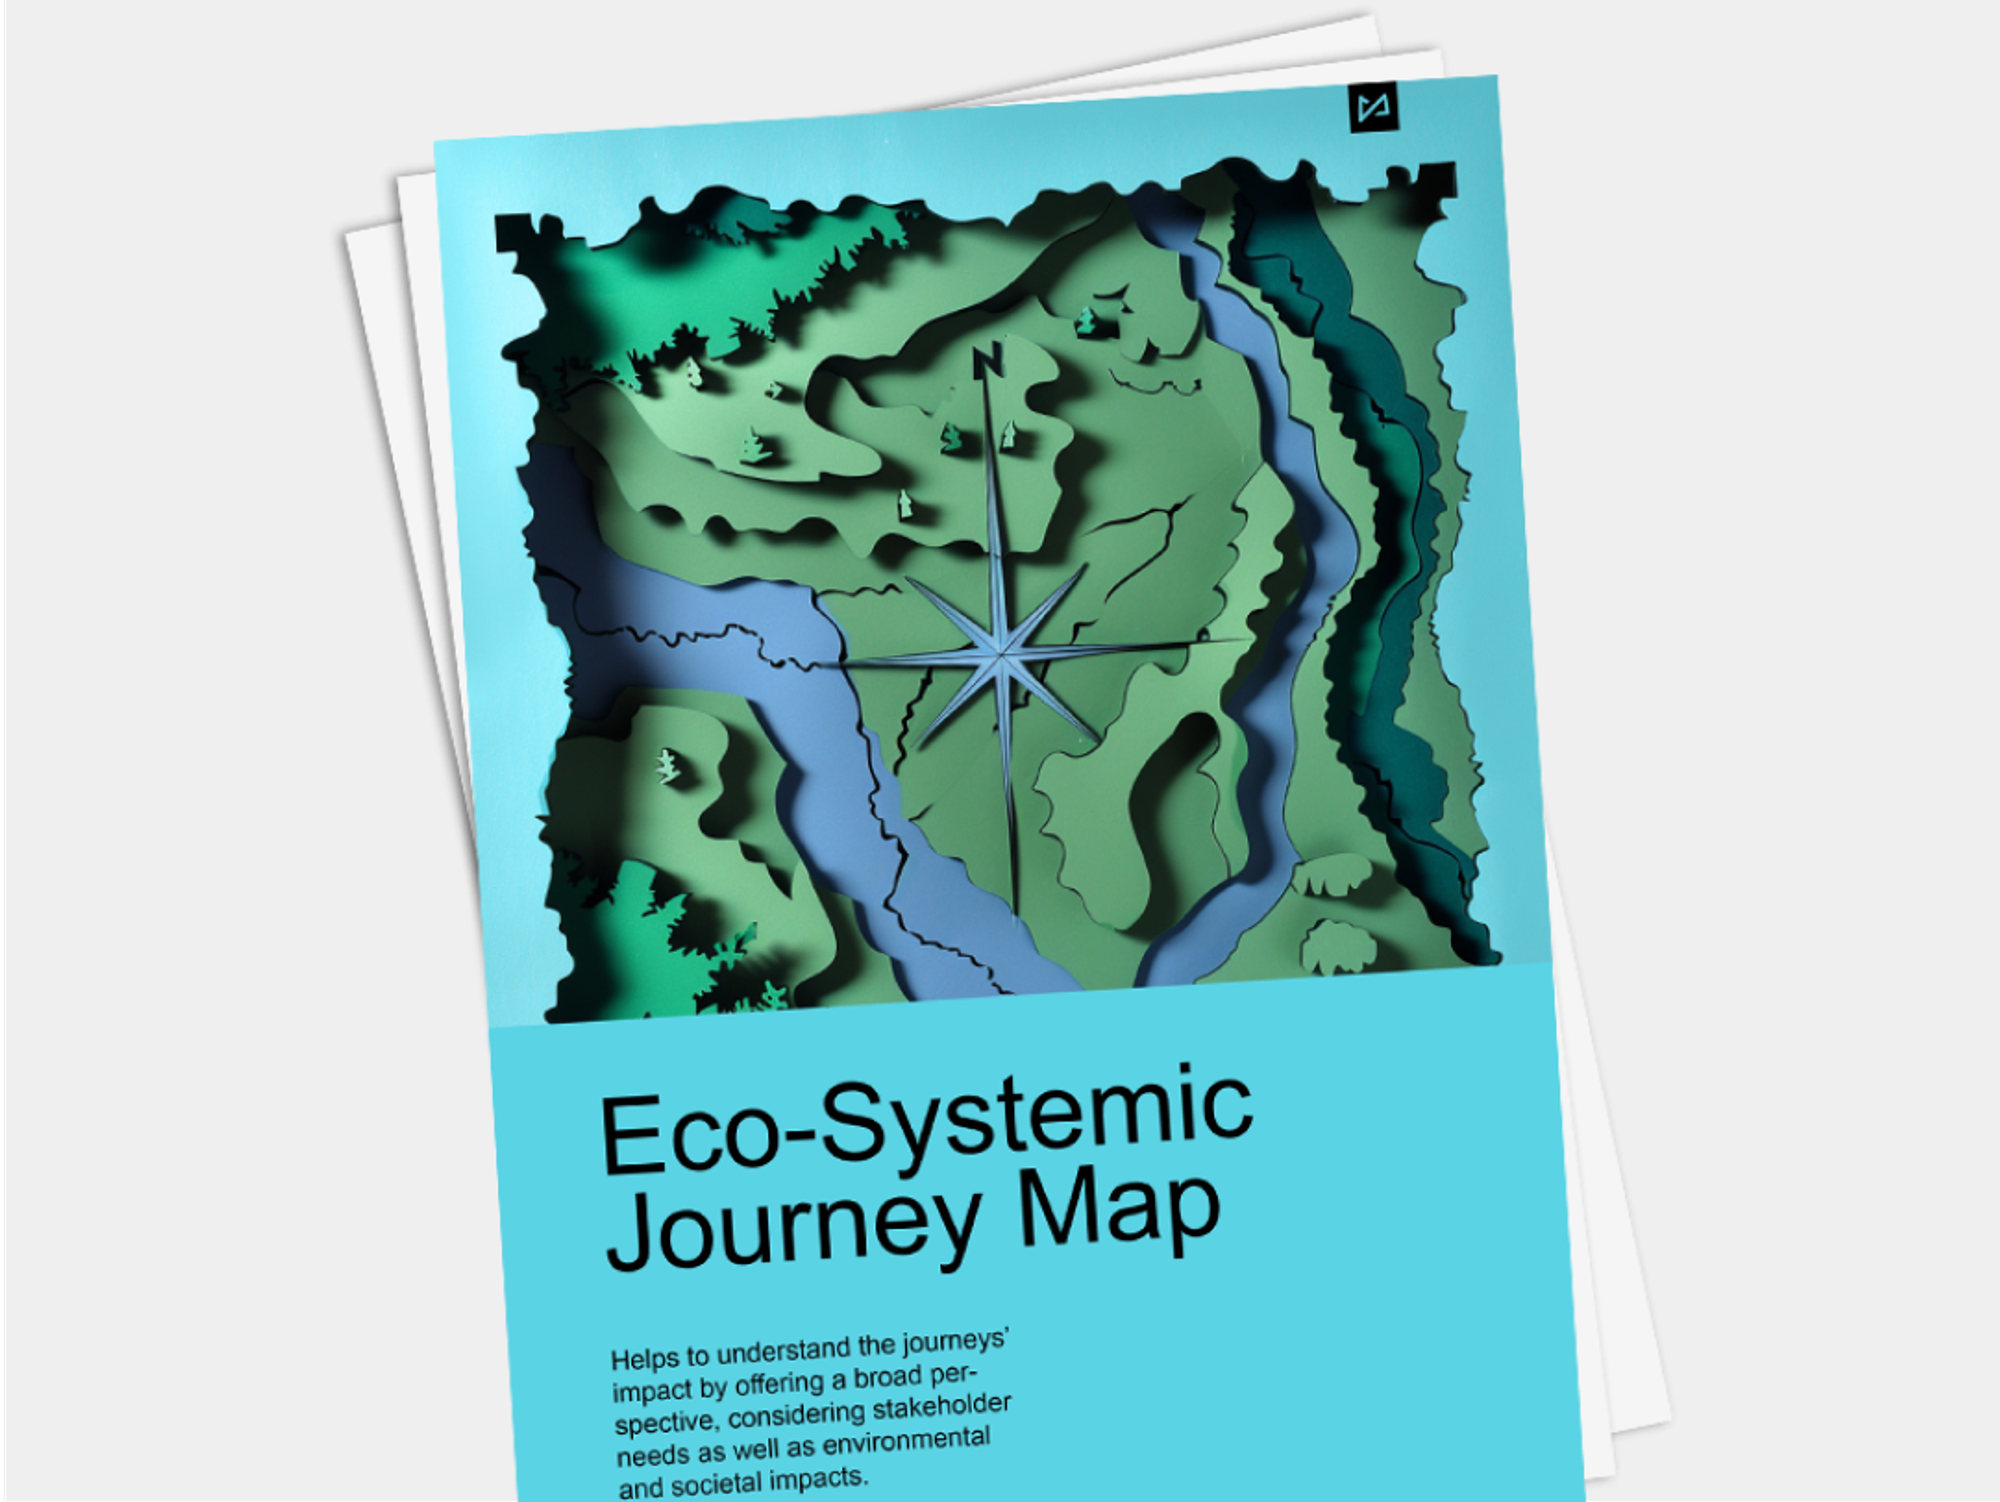 Booklet with "Eco-Systemic Journey Map" on its cover